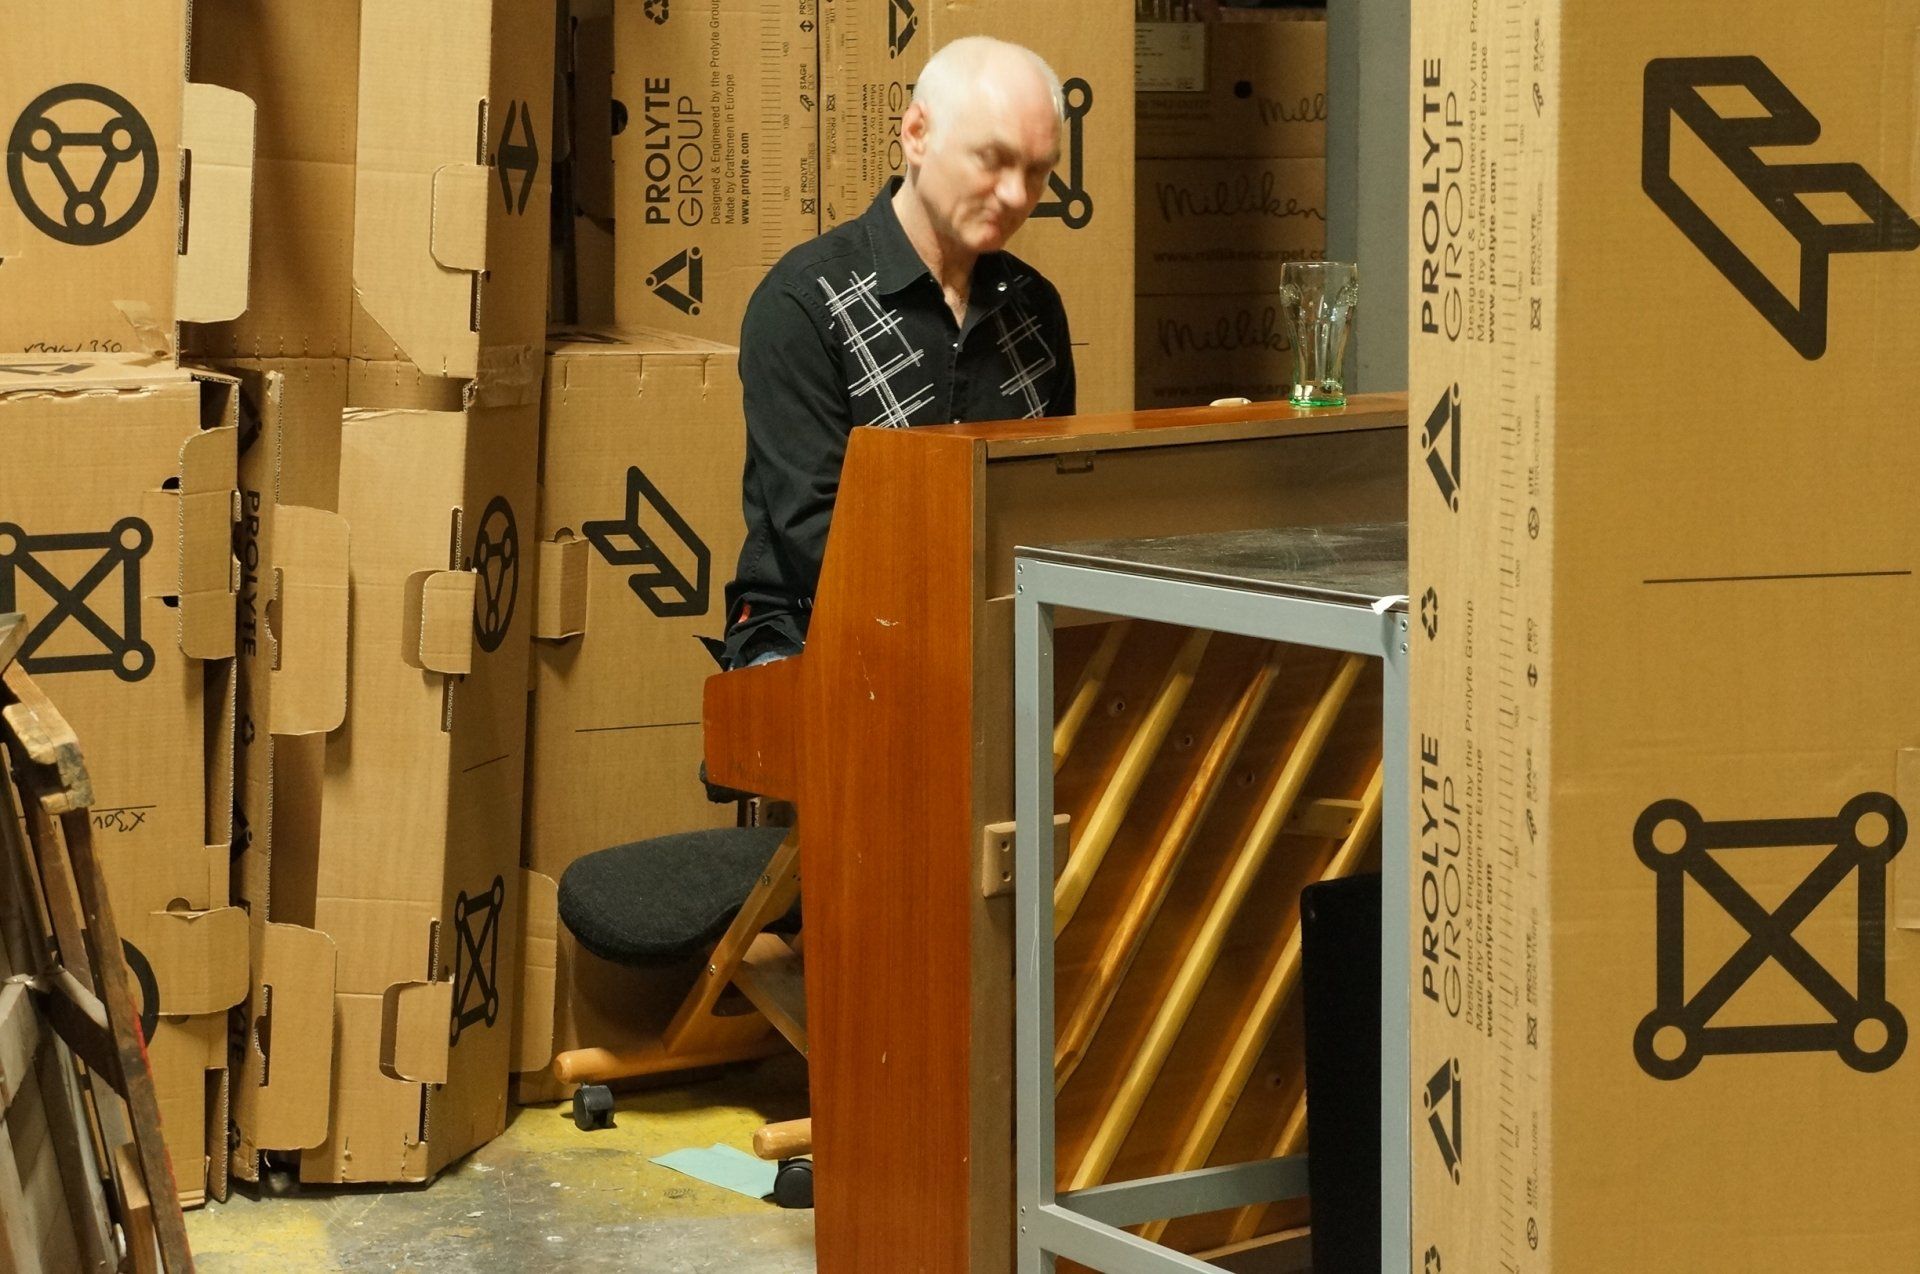 a man is playing a piano in a room filled with cardboard boxes